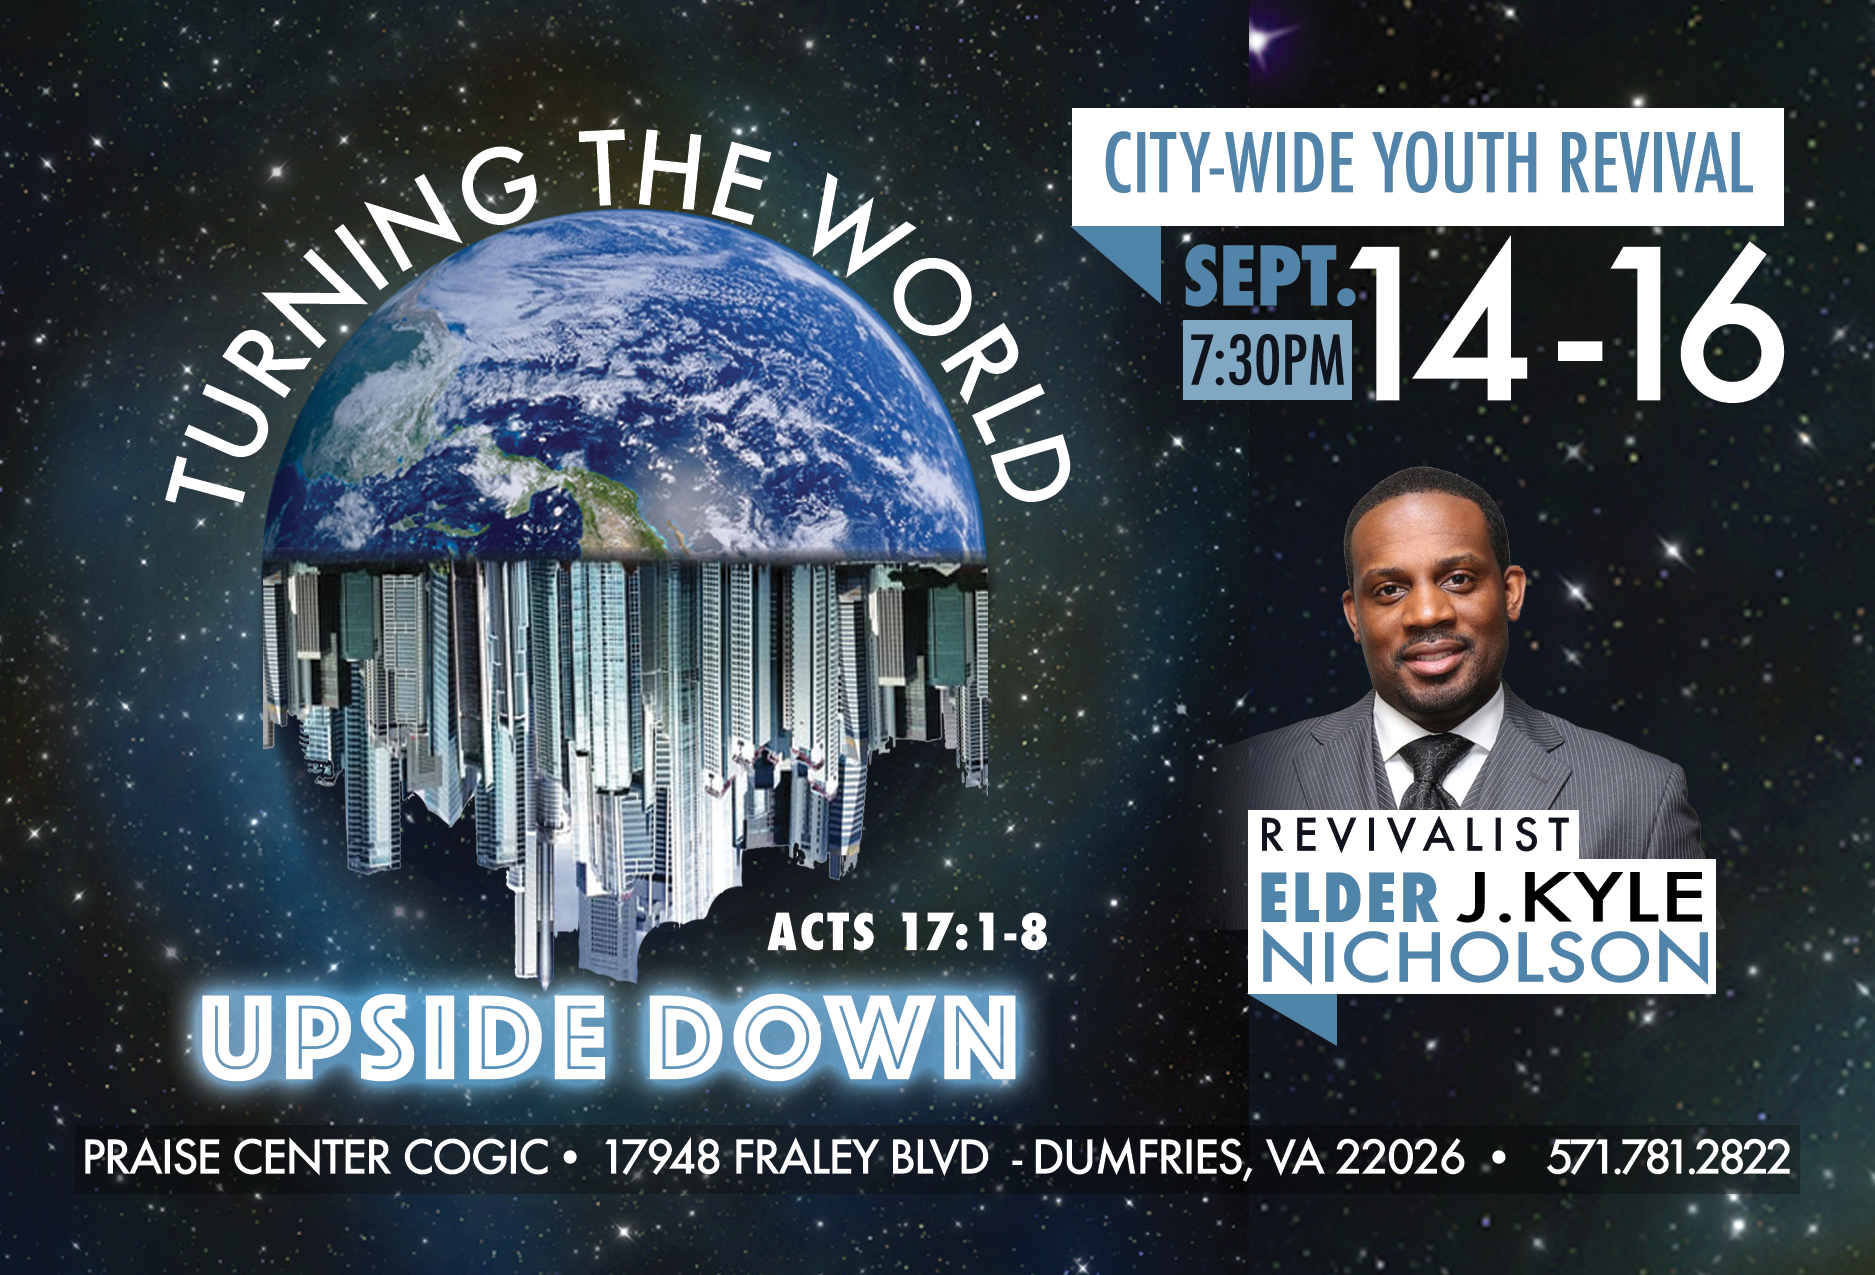 2016 City-Wide Youth Revival